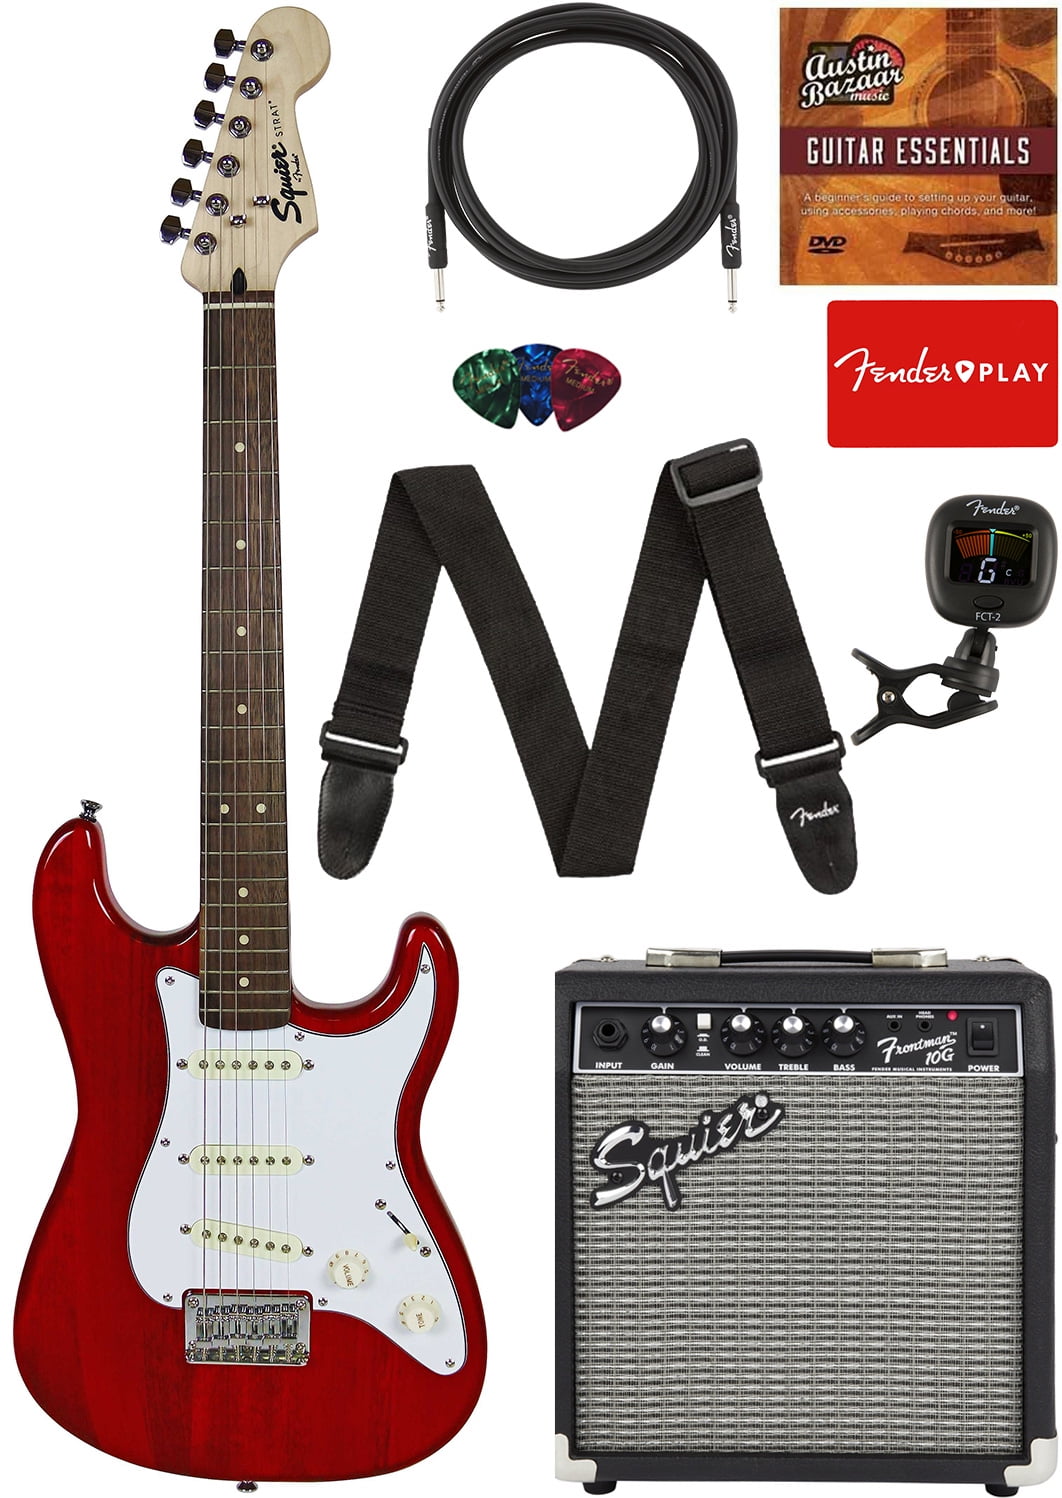 Cable Strap Squier by Fender Short Scale Stratocaster Pack with Frontman 10G Amp Renewed and Picks - Red